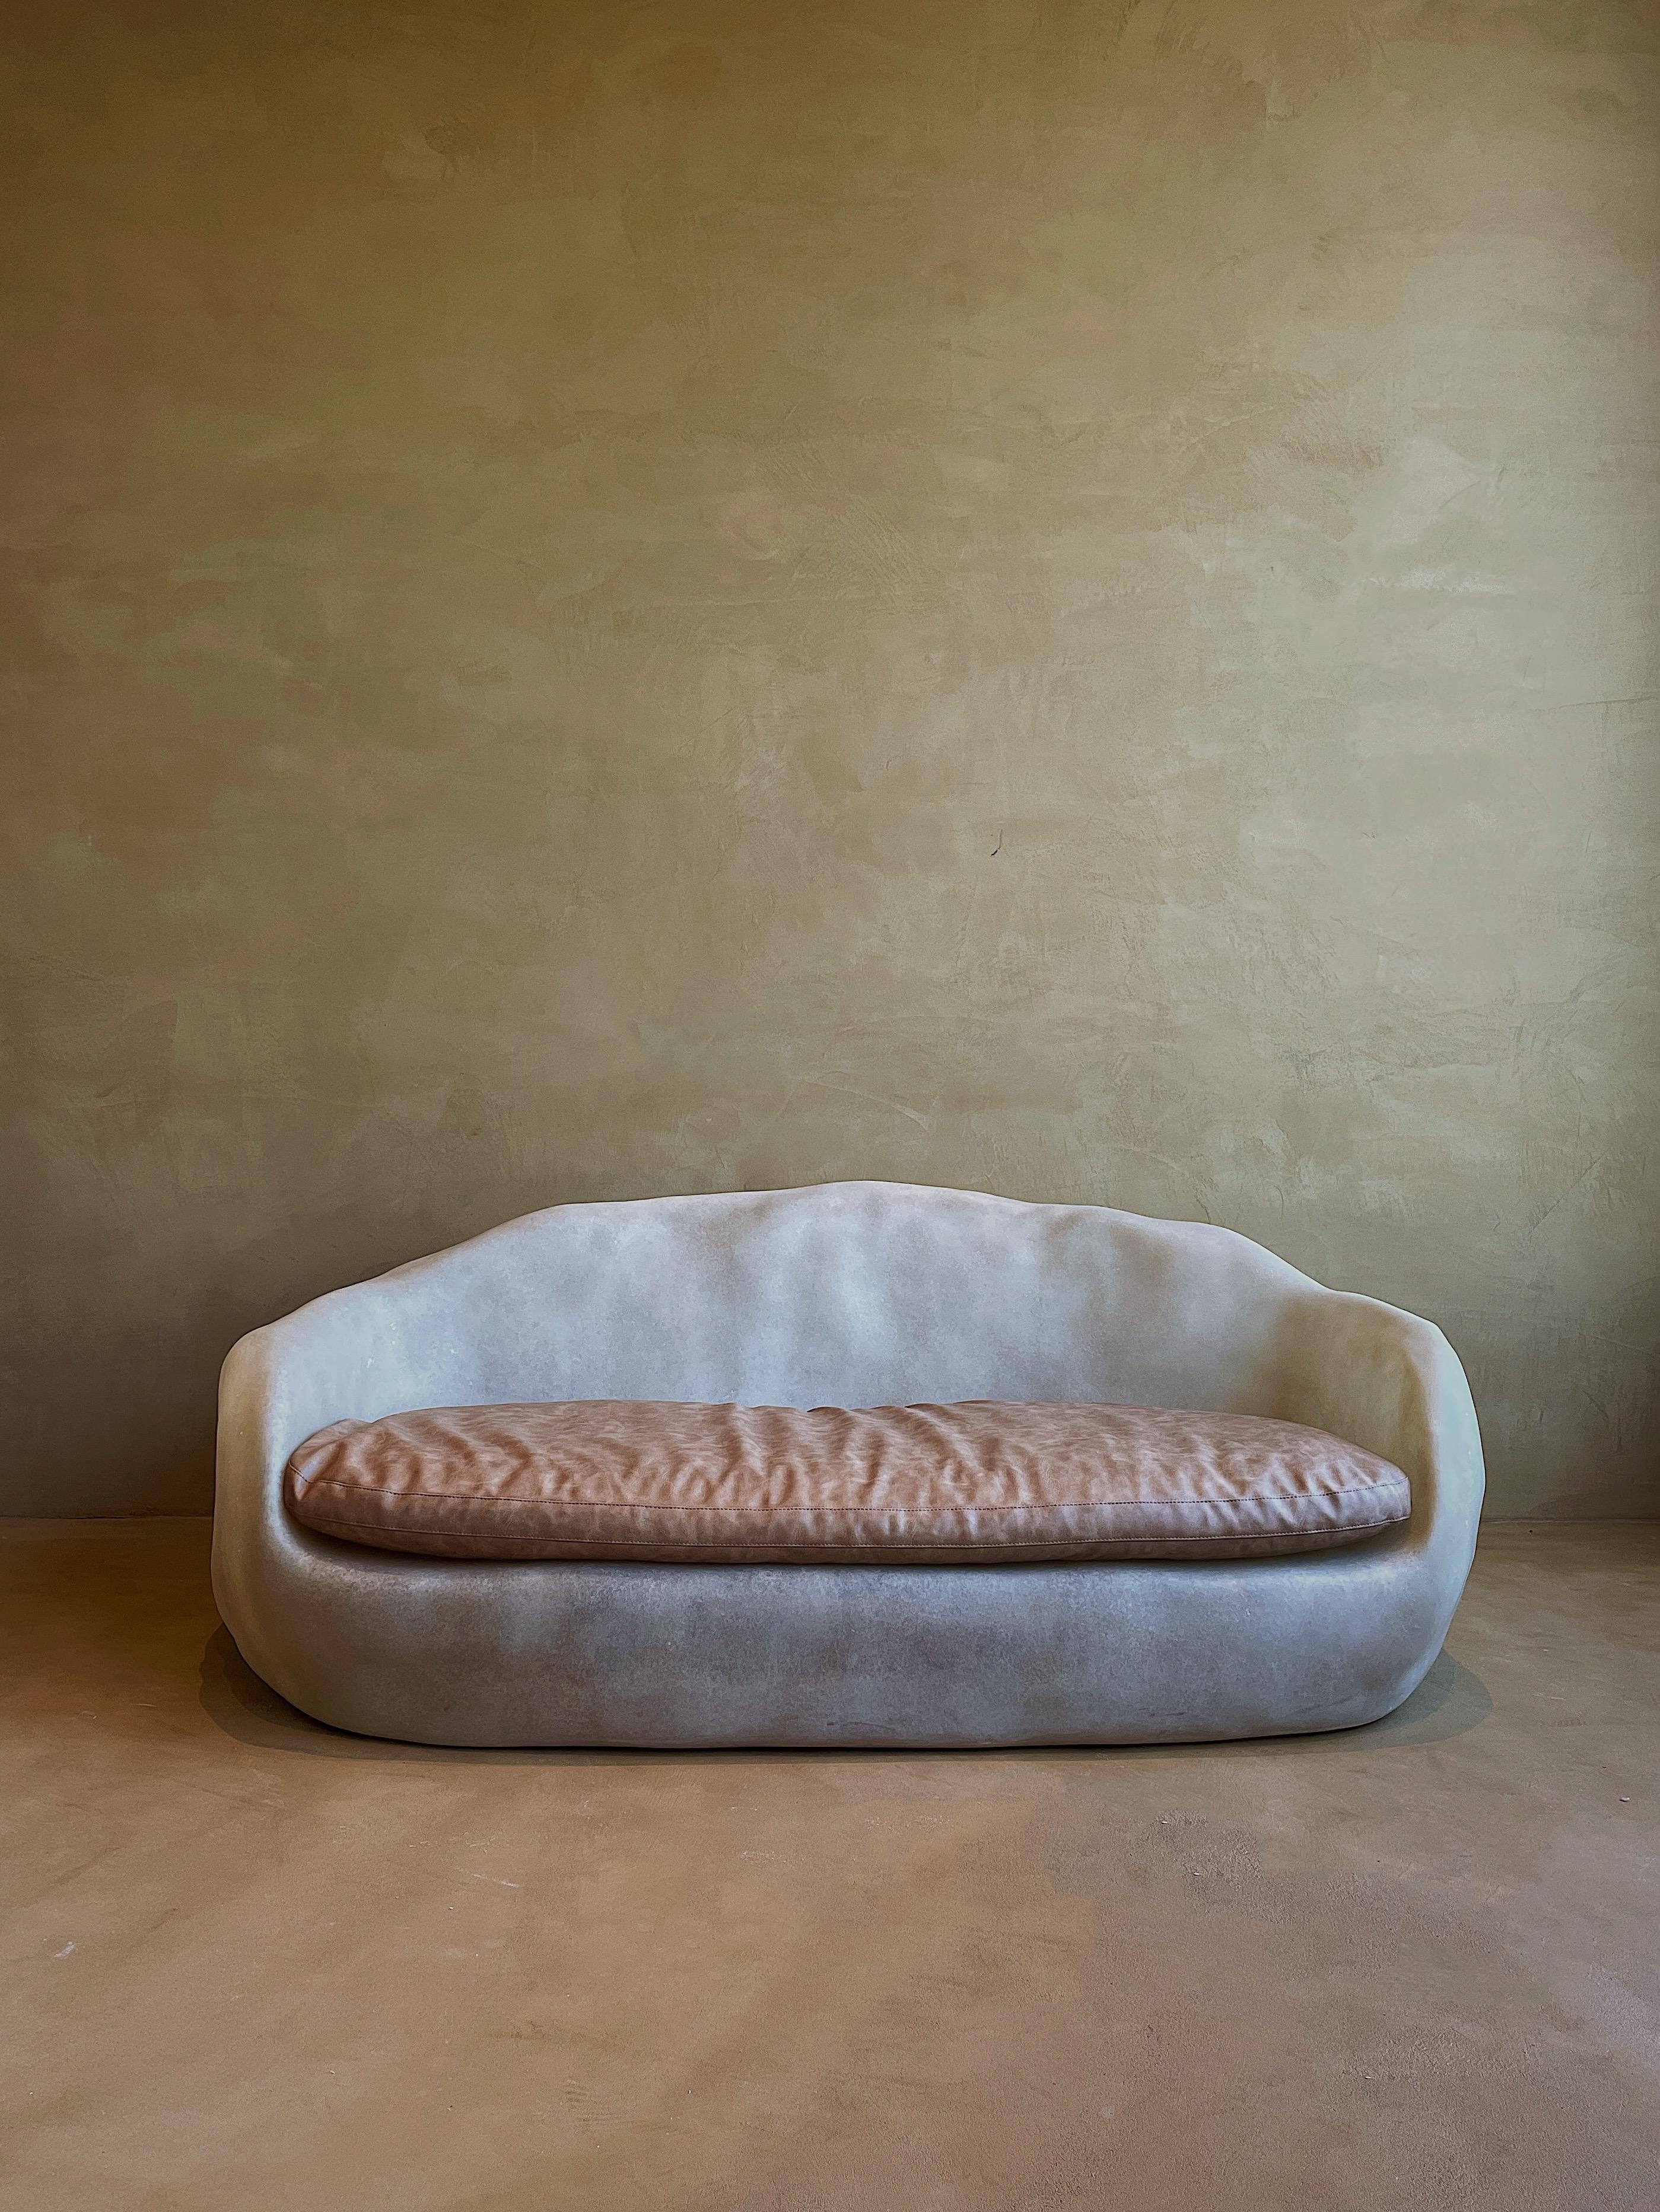 Knead sofa by Karstudio.
Dimensions: W 180 x D 100 x H 70 cm.
Materials: FRP.

Kar, is the root of Sanskrit Karma, meaning karmic repetition. We seek the cause and effect in aesthetics, inspired from the past, the present, and the future, and we